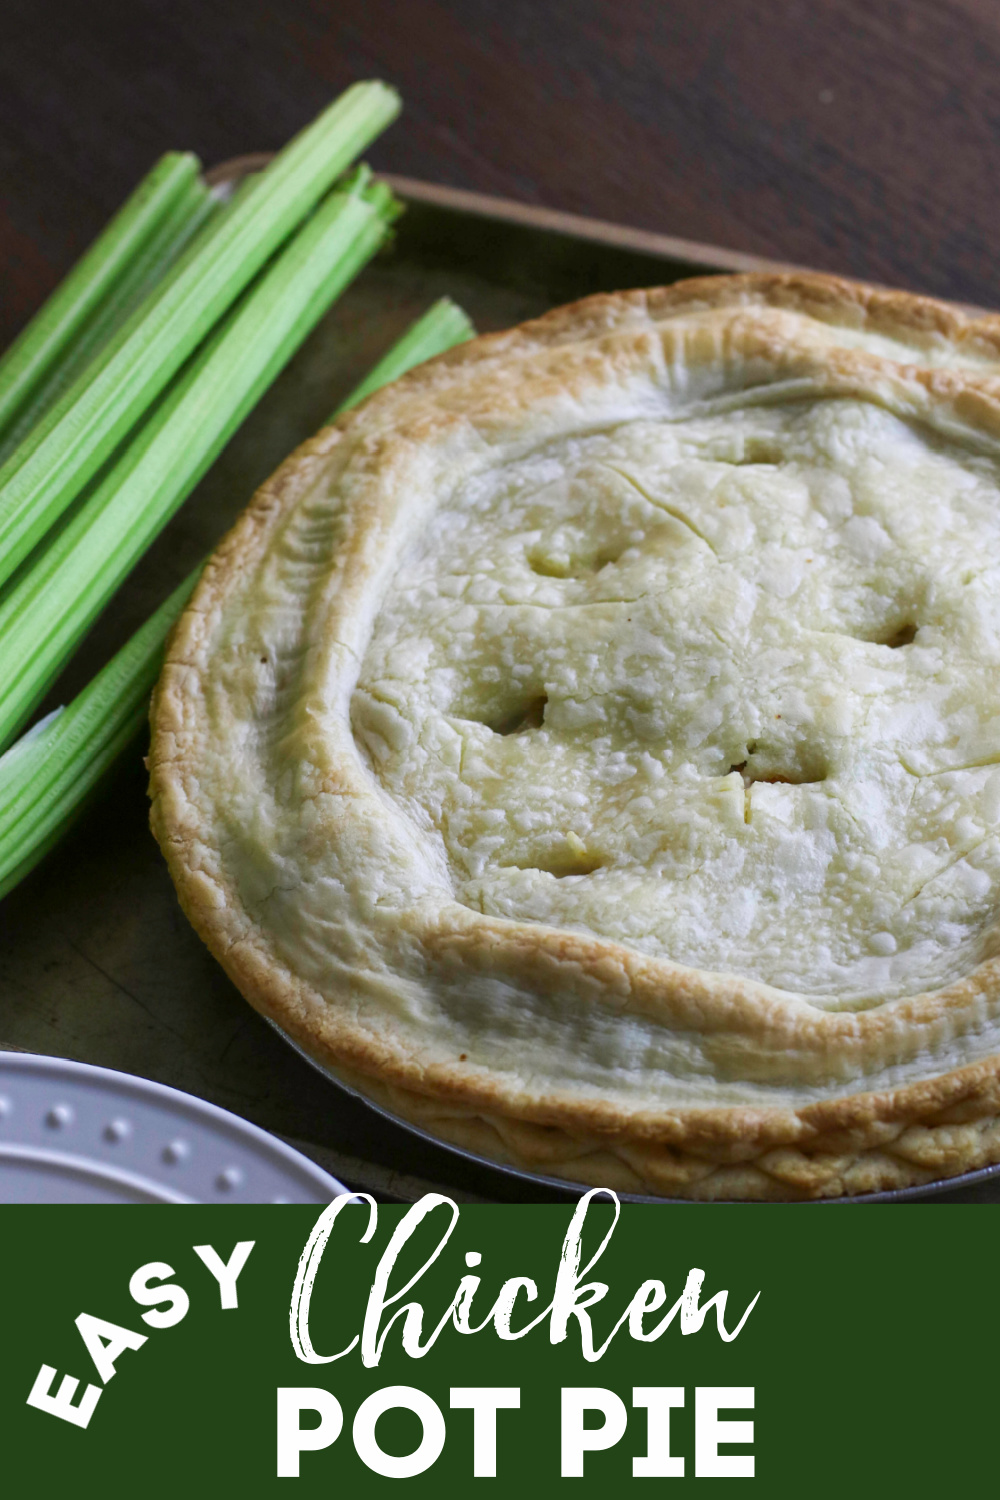 This easy chicken pot pie is a delicious, hearty meal that comes together quickly with Rotisserie chicken, vegetables, seasonings, and more. It's the perfect meal that tastes like you've spent hours slaving in the kitchen.